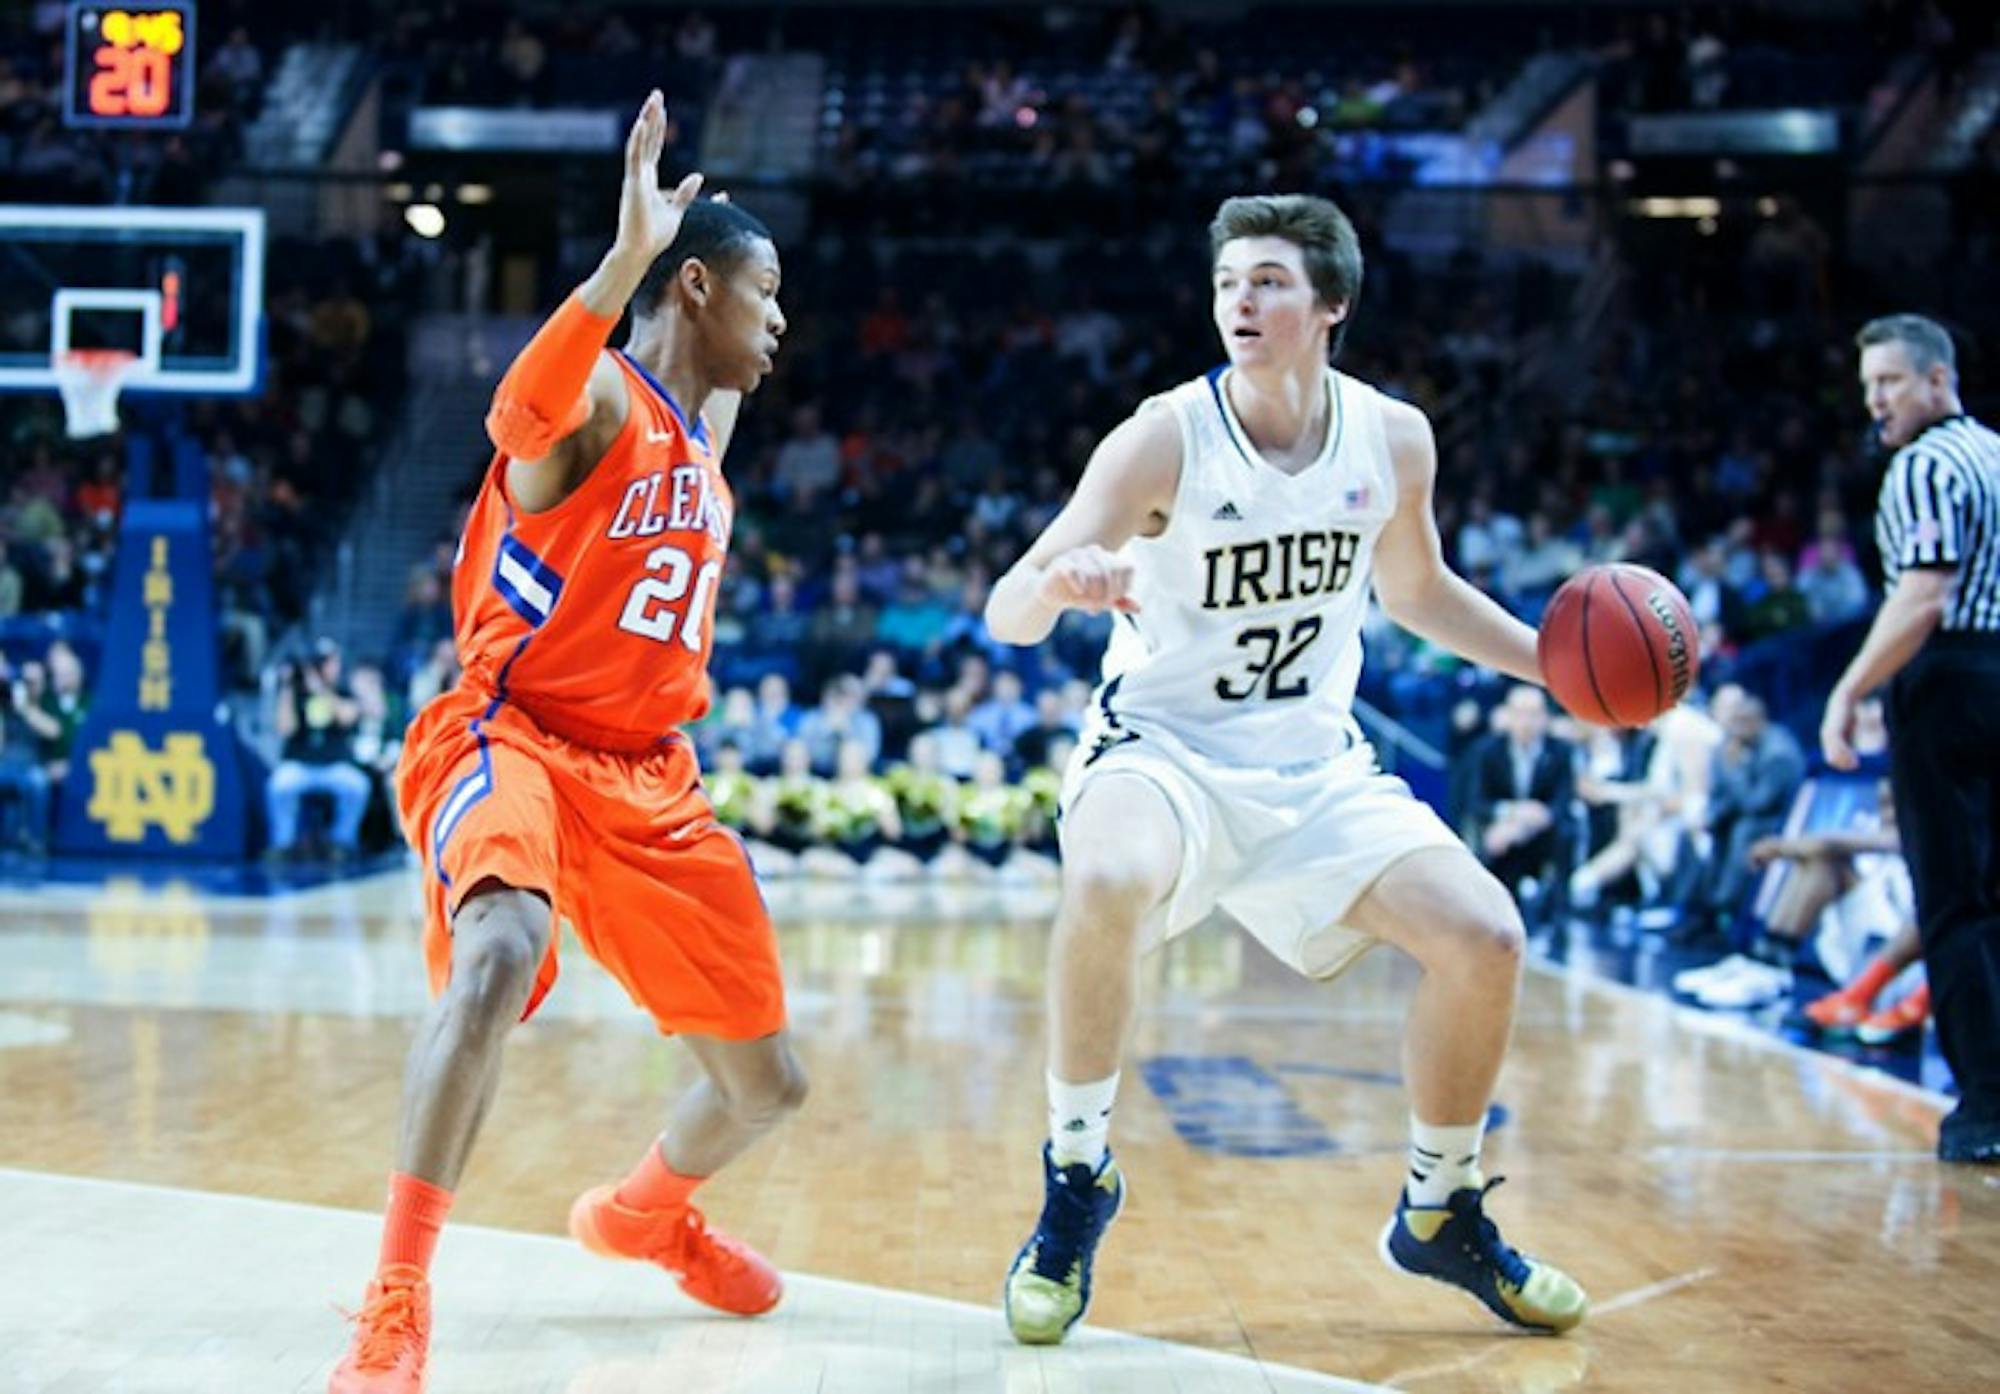 Irish freshman guard Steve Vasturia controls the ball during Notre Dame’s 68-64 win (2OT) over Clemson in the Purcell Pavilion on Feb. 11.